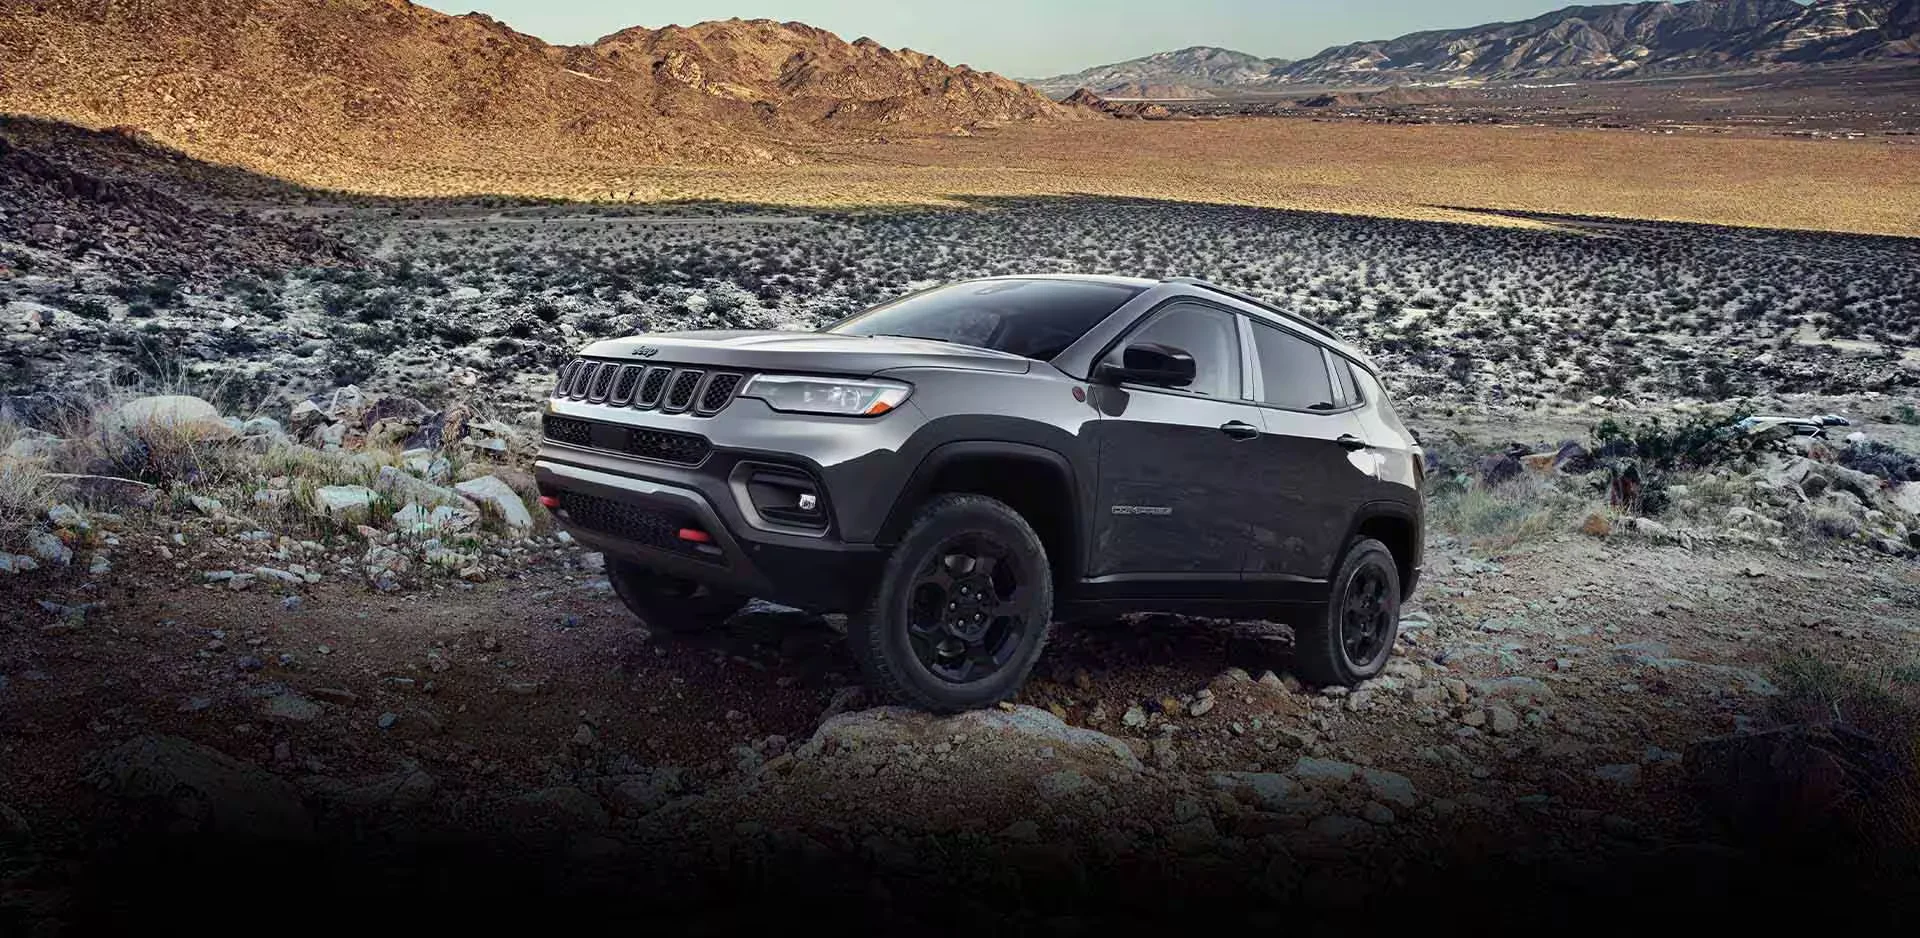 The Jeep Compass Trailhawk